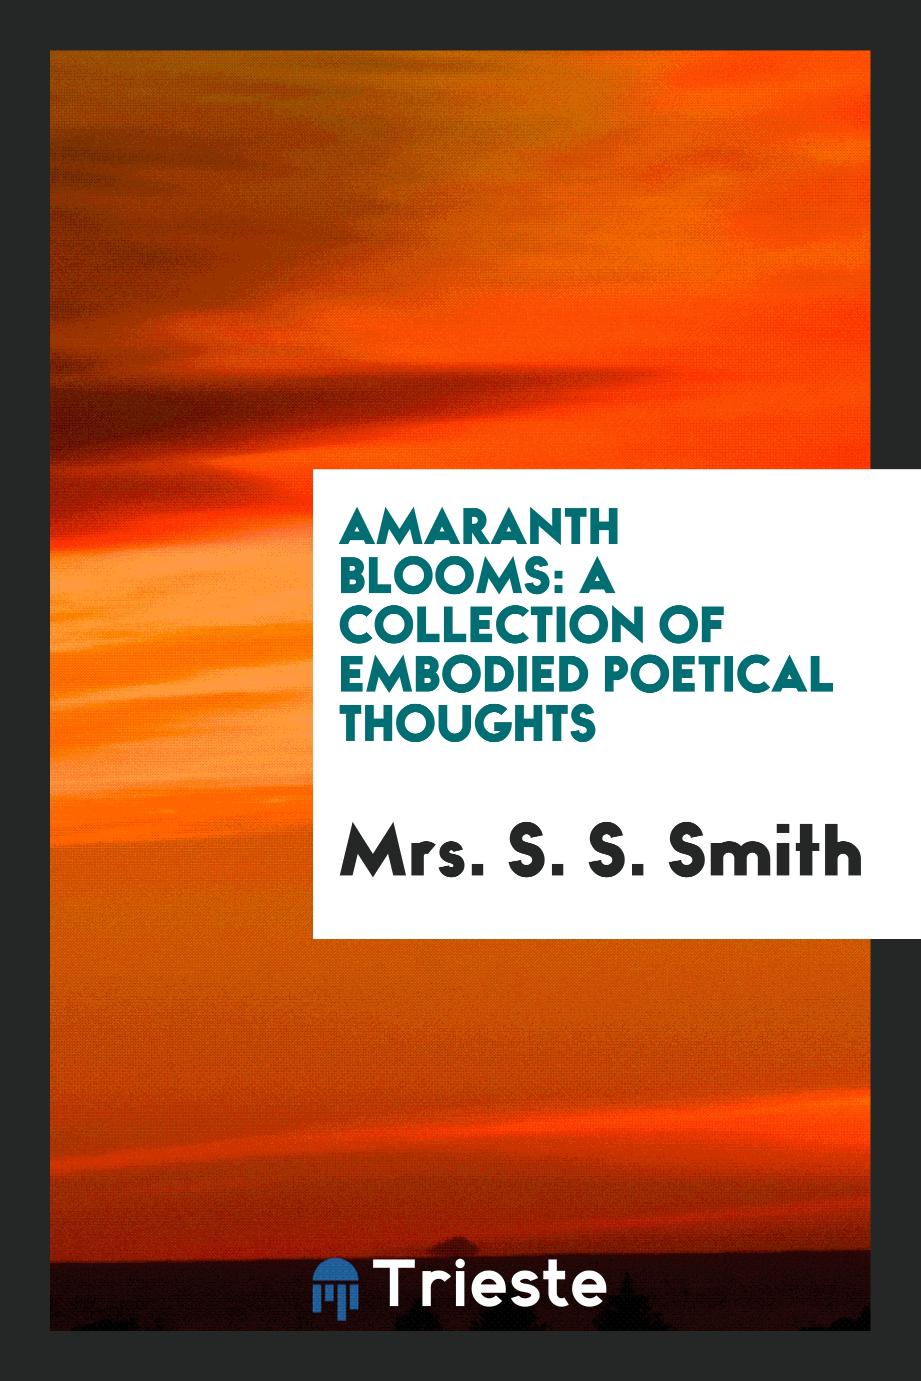 Amaranth blooms: a collection of embodied poetical thoughts